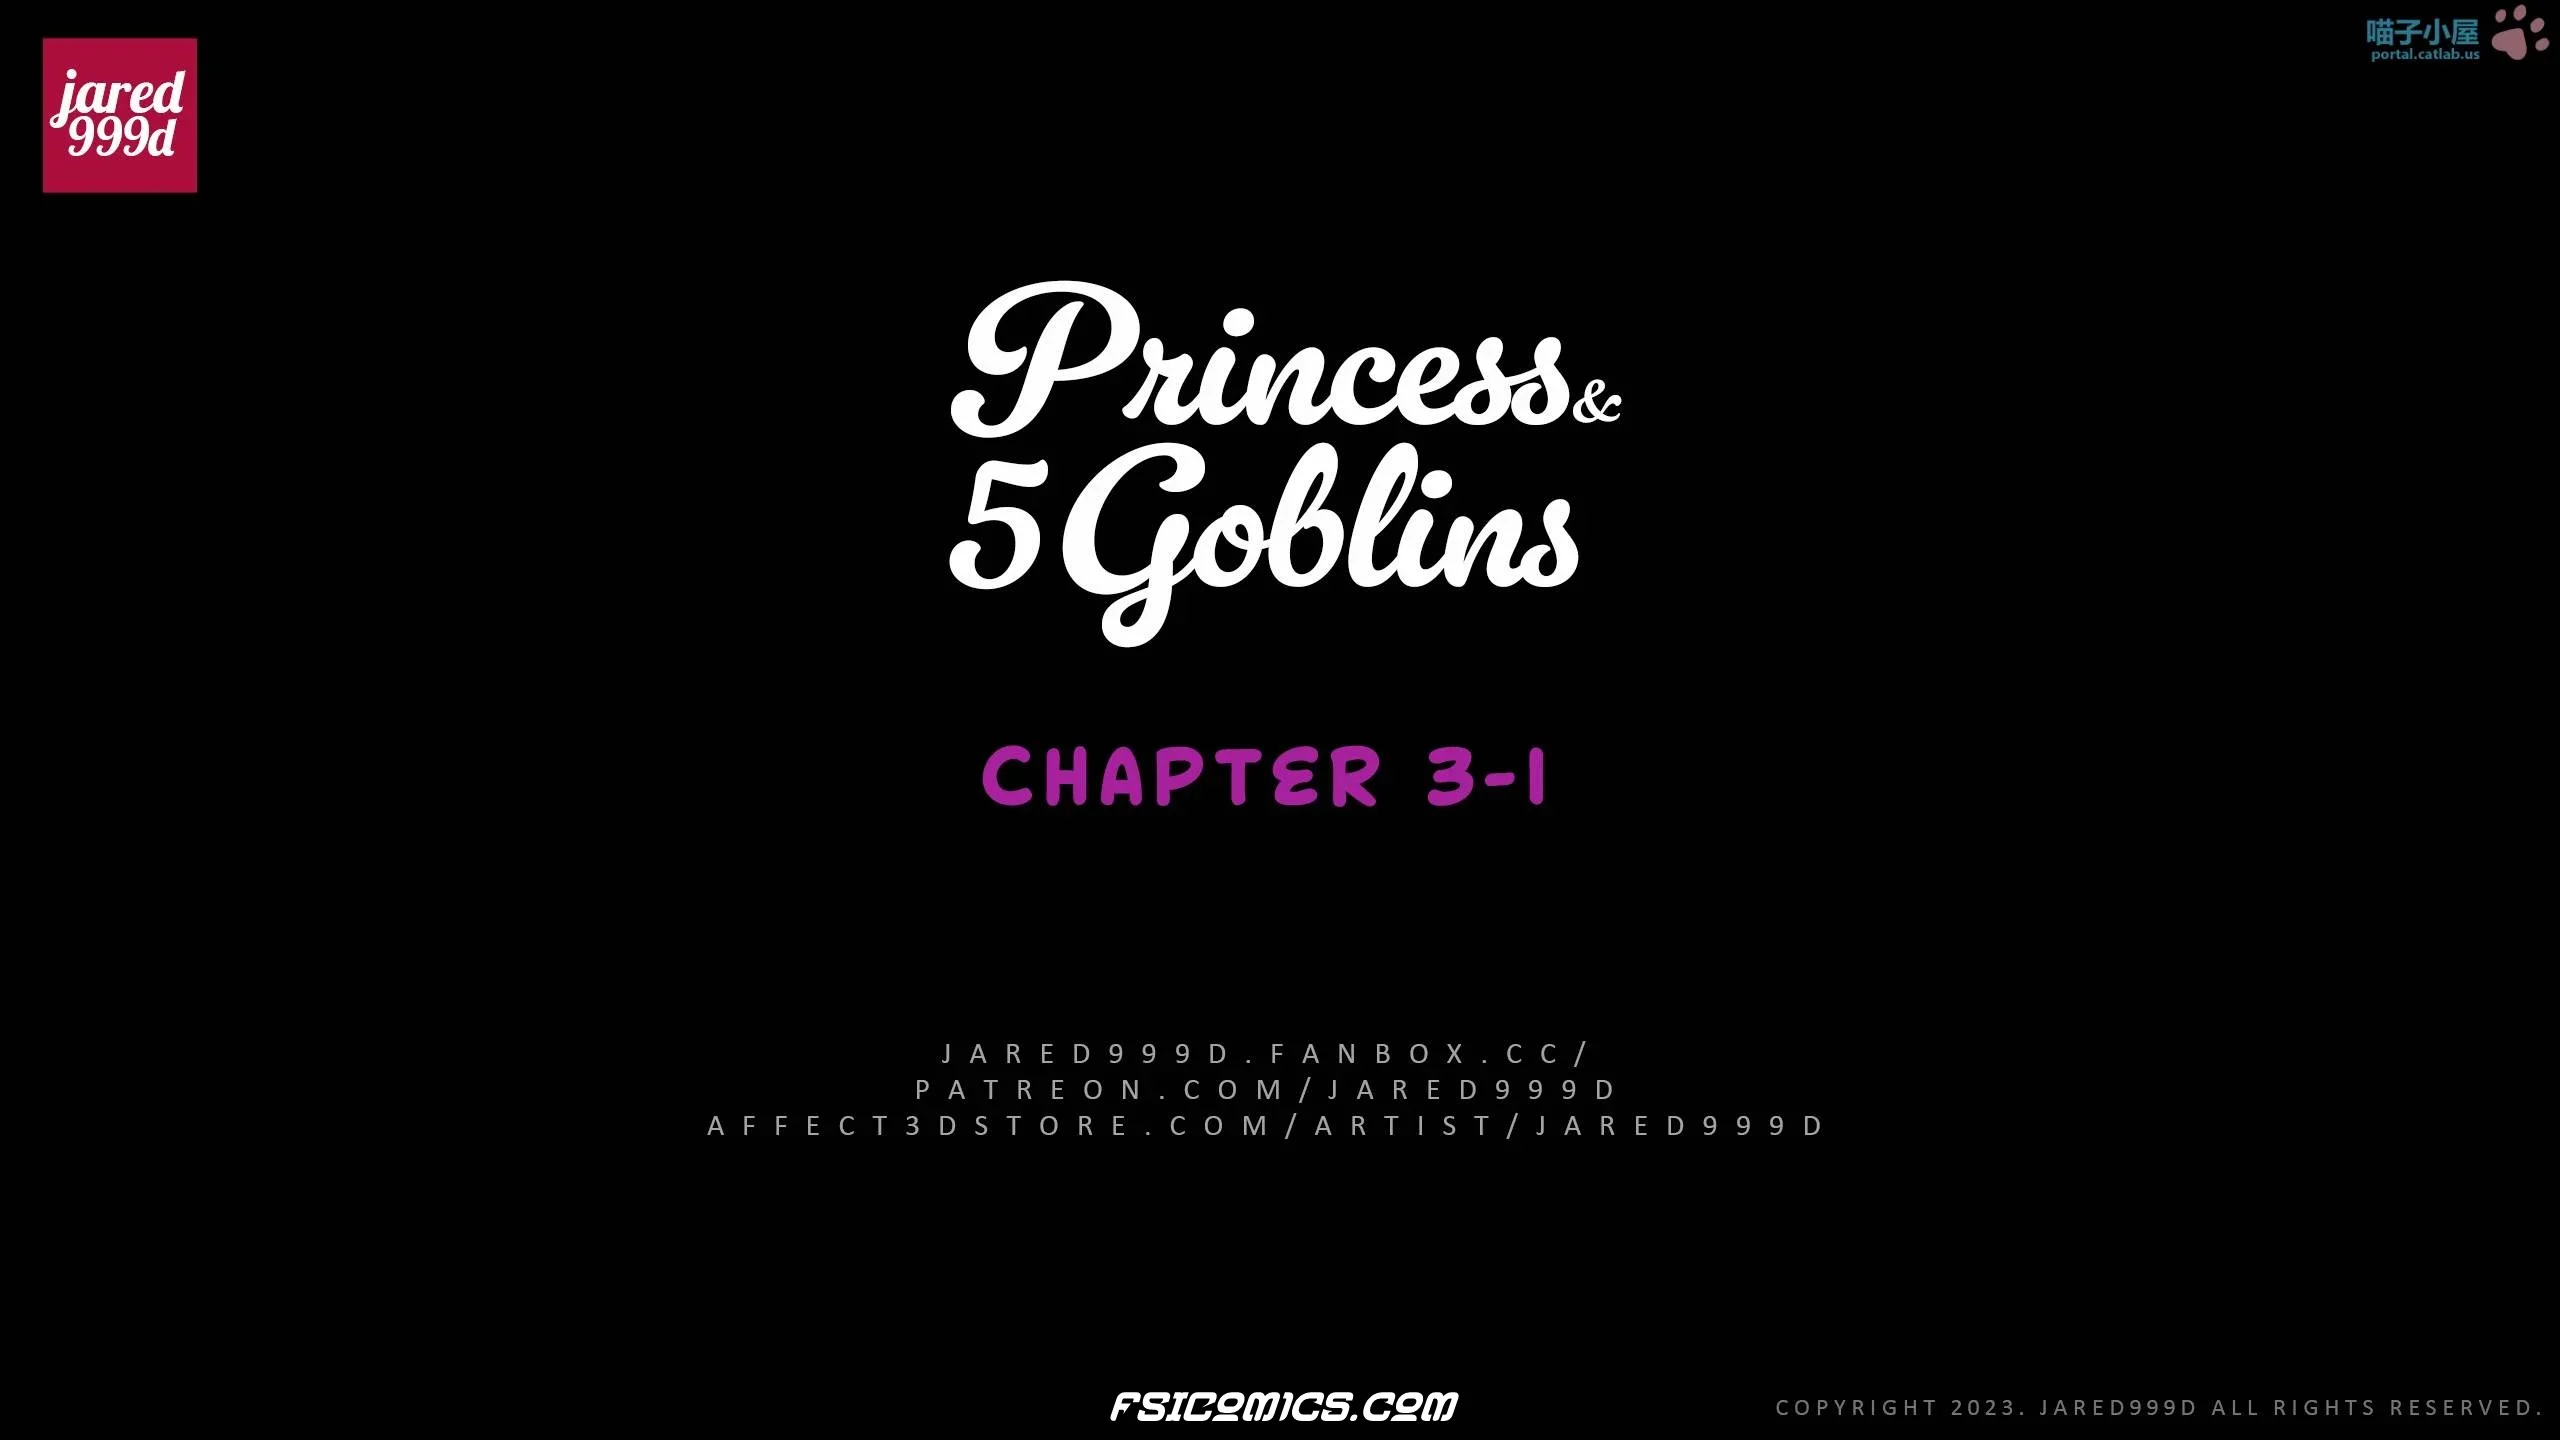 Princess And 5 Goblins Chapter 3 - Jared999D - 581 - FSIComics